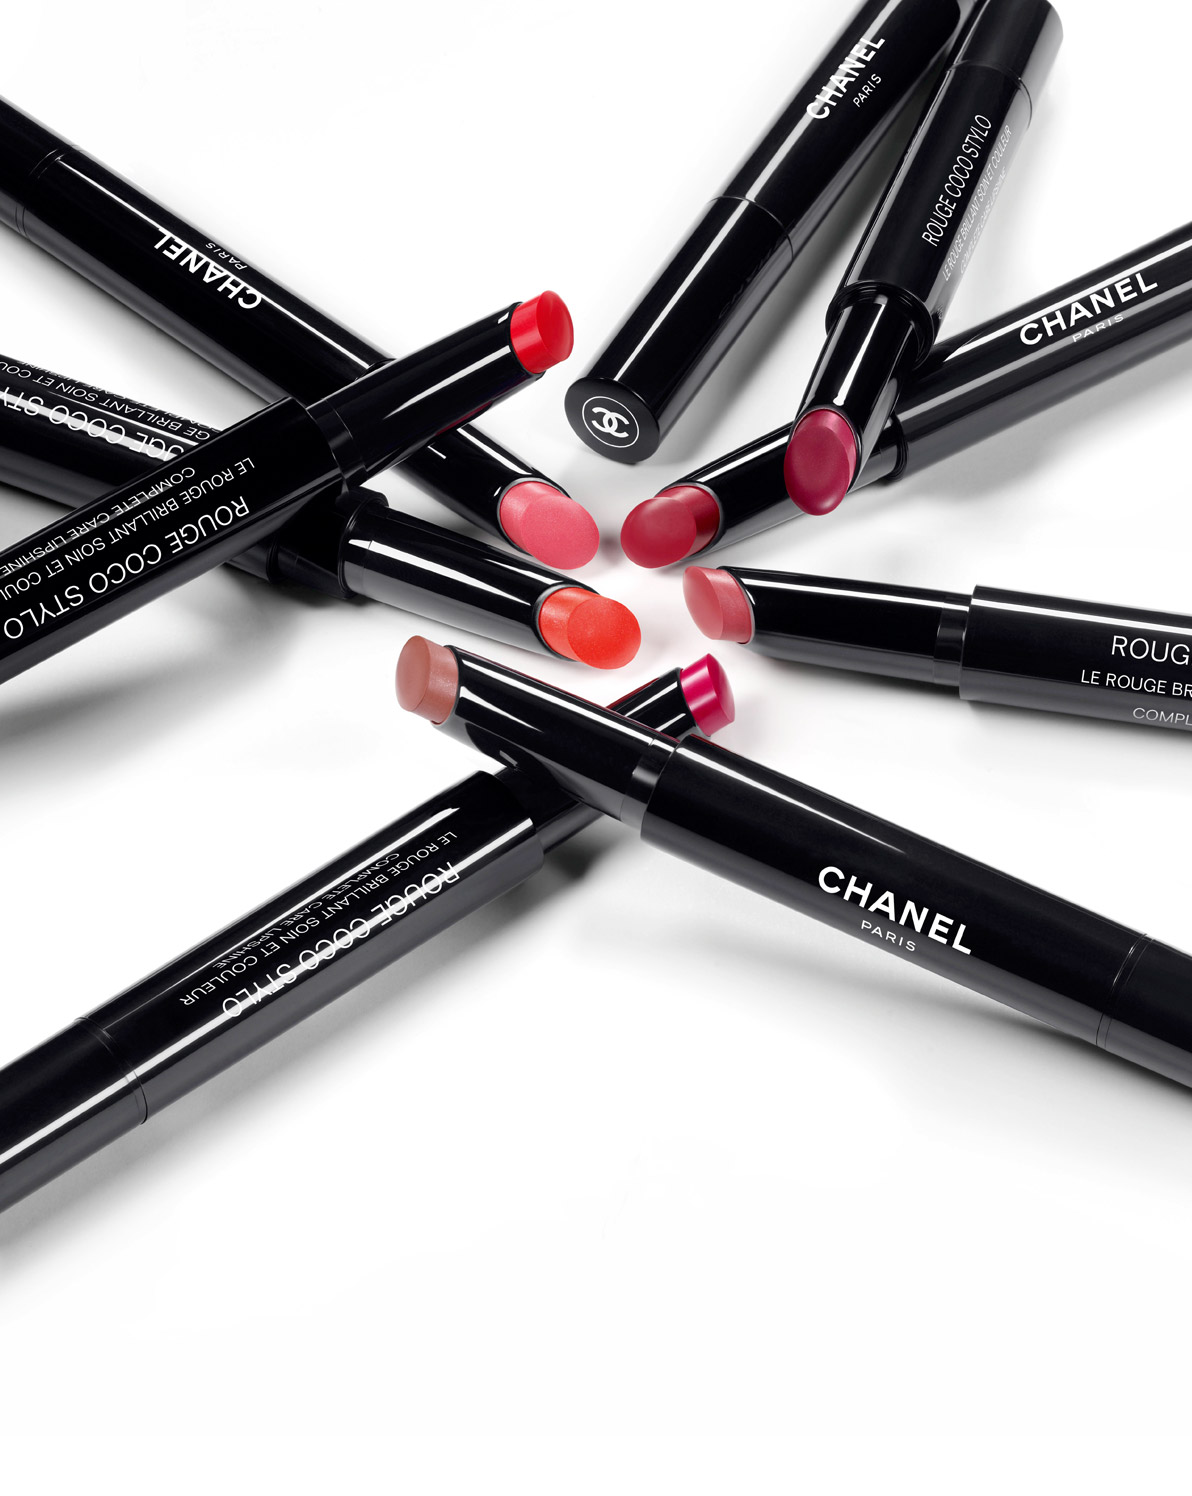 Jayded Dreaming Beauty Blog : NEW! CHANEL ROUGE COCO STYLO LIPSHINES AND LE  VERNIS LONGWEAR NAIL COLOUR - NOW AVAILABLE